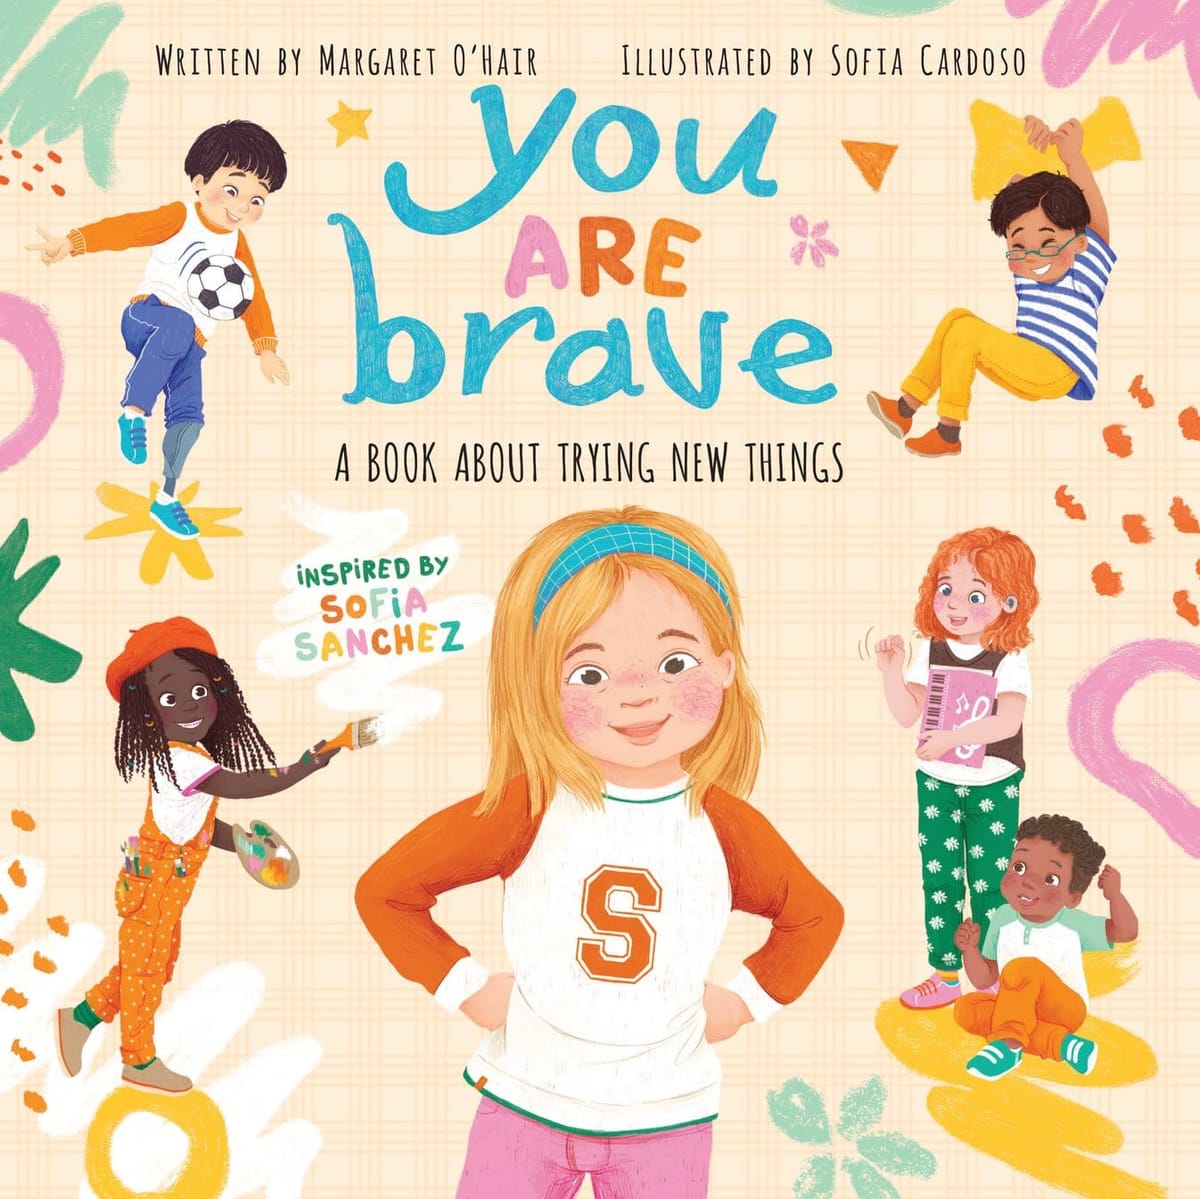 Teaching your child to be brave using picture books